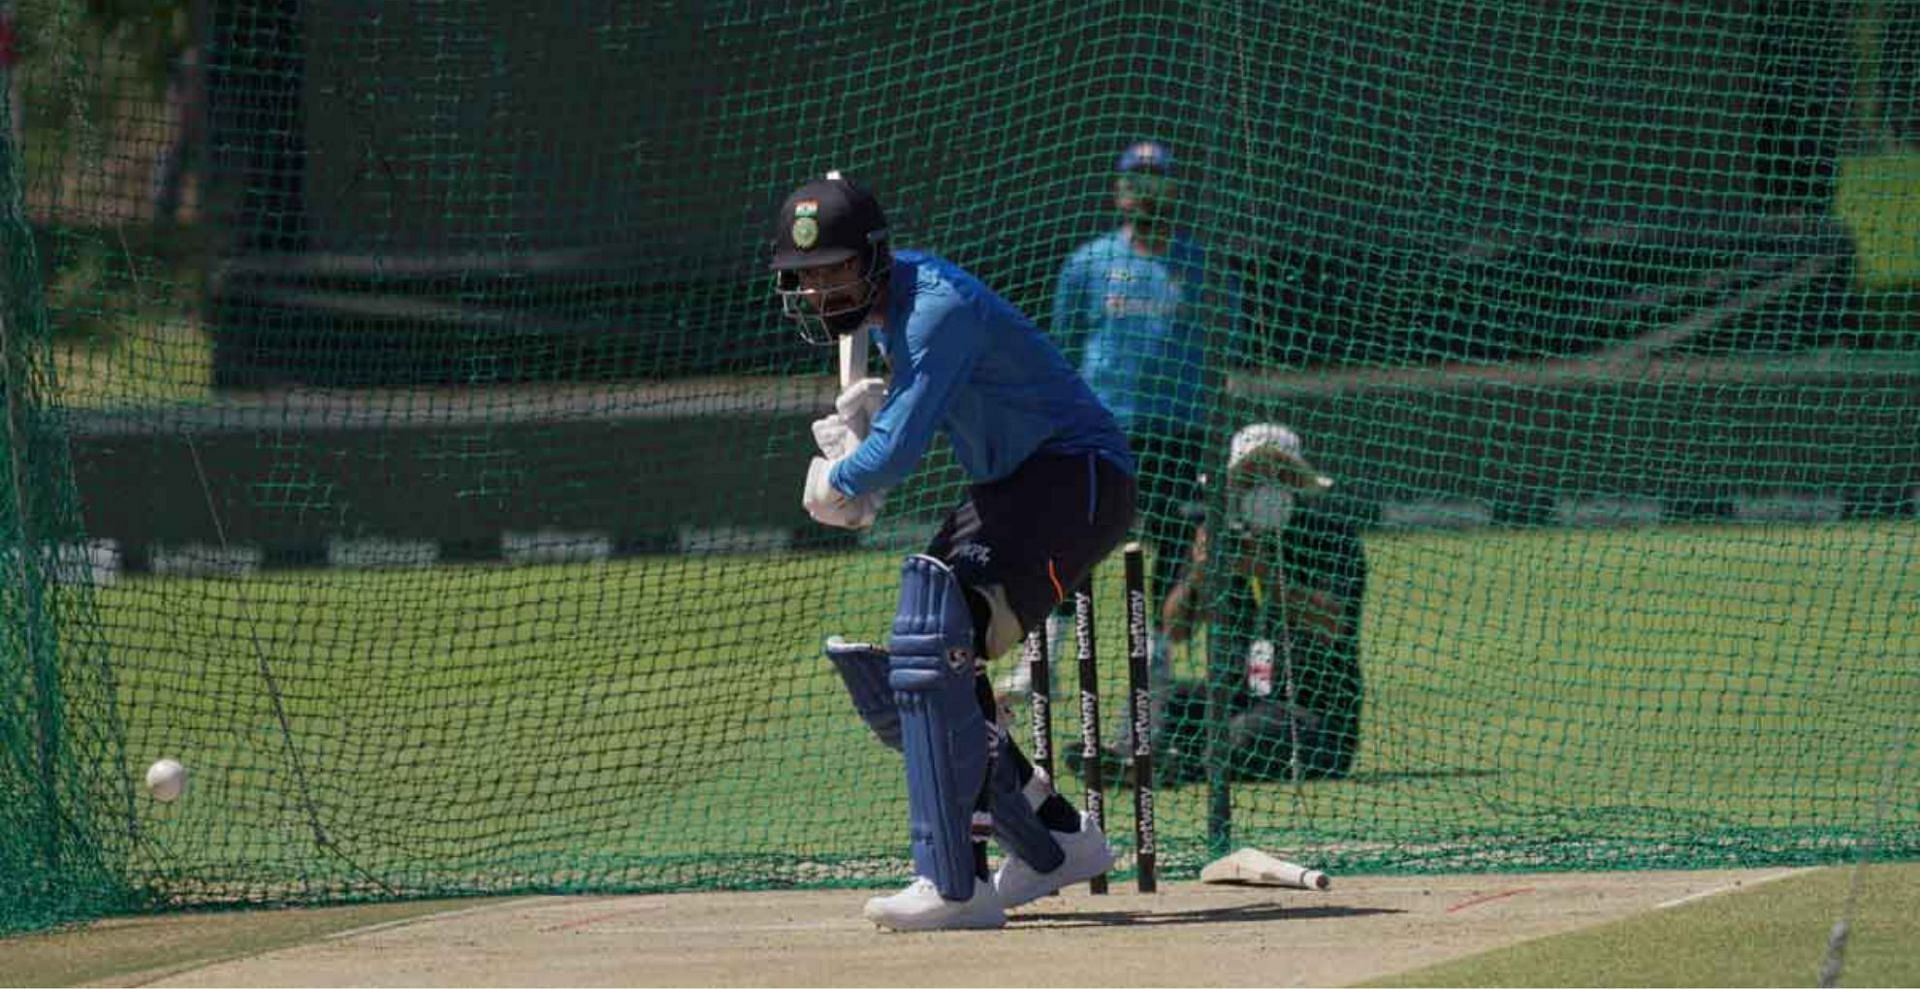 KL Rahul has resumed training after surgery on his groin. (Credit: Twitter)